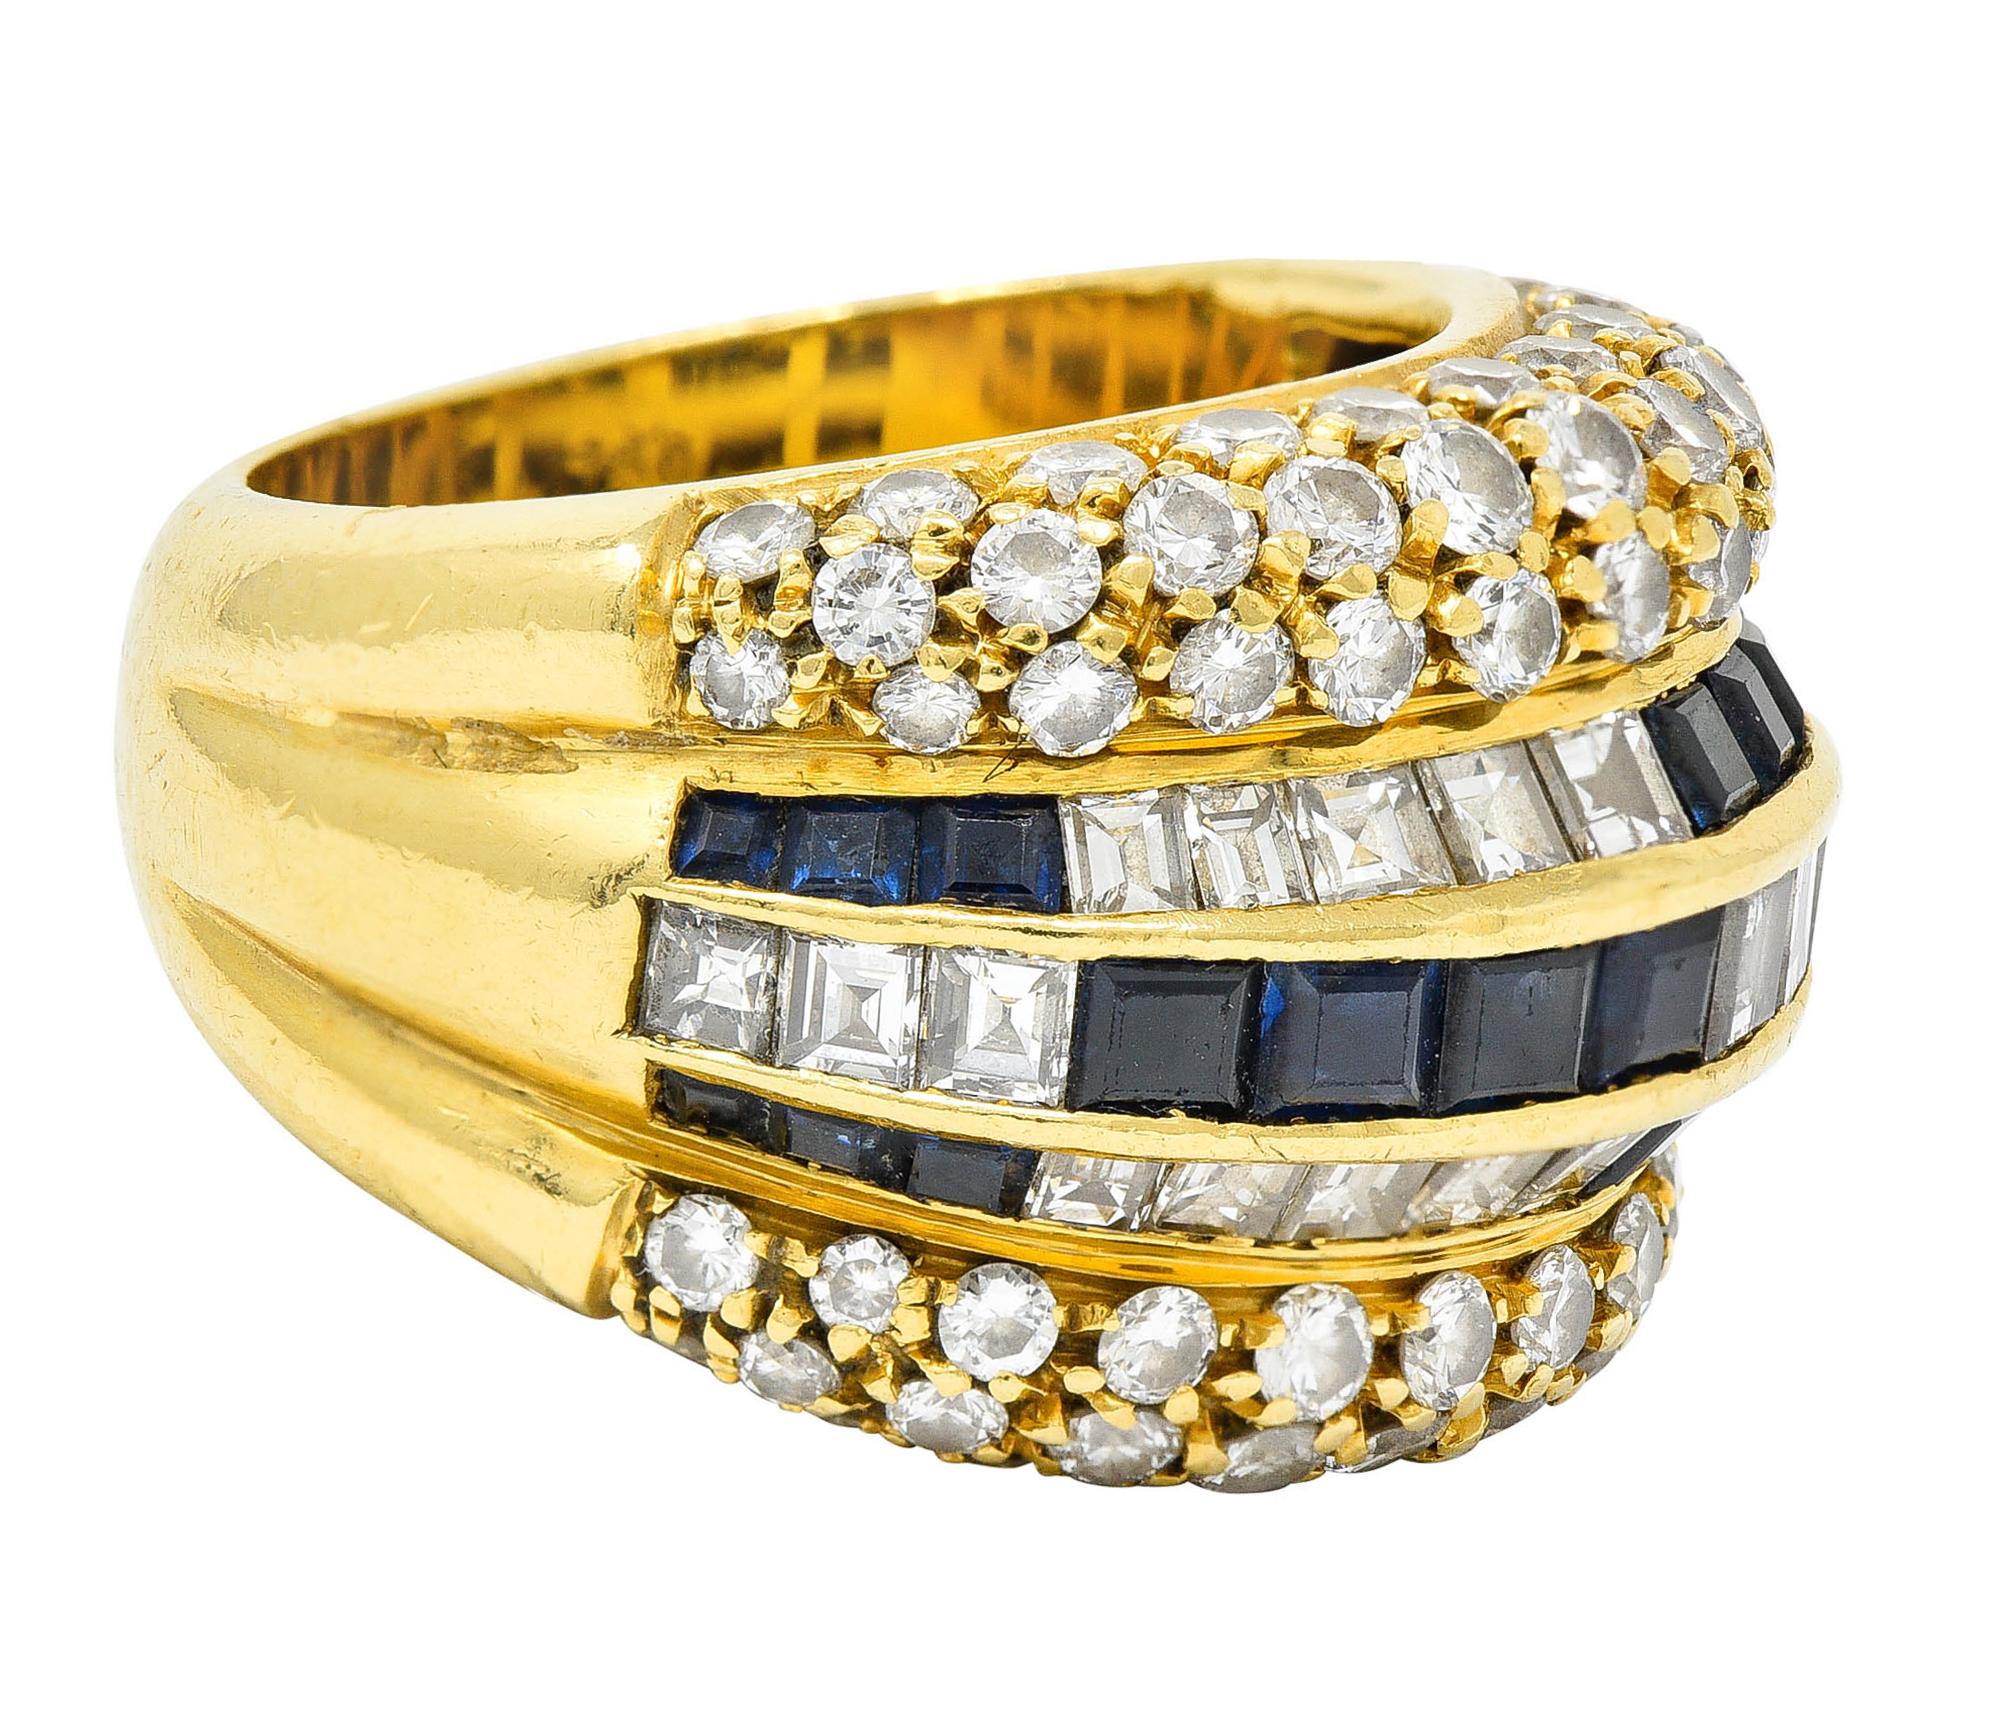 Band ring features a deeply ridged design set with sapphires and diamonds

Center is channel set by calibrè cut sapphires and stepped cut diamonds

Sapphires are a well matched medium dark blue and weigh in total approximately 2.50 carats

Diamonds